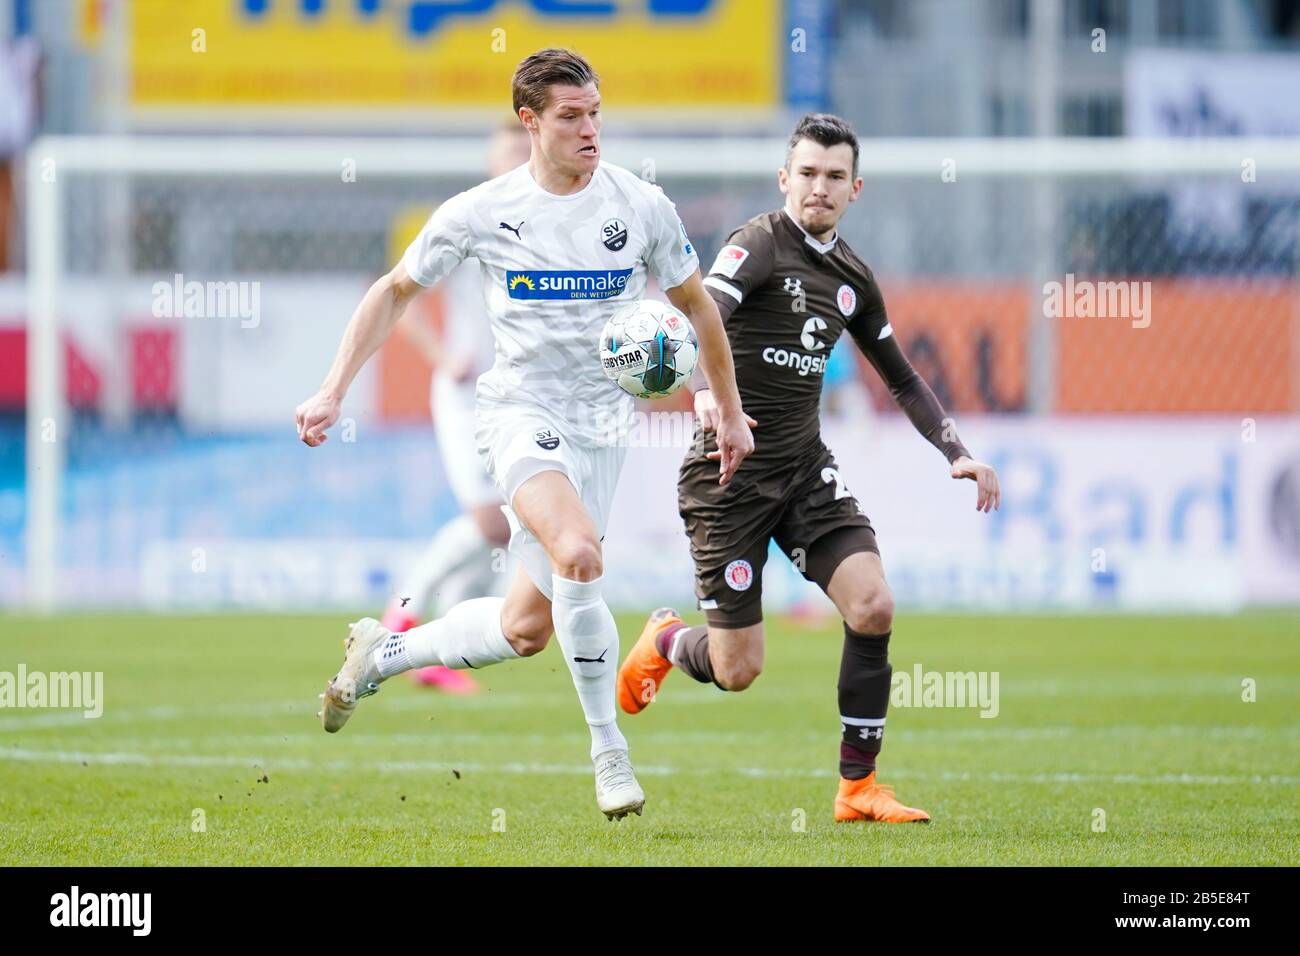 Sandhausen, Germany. 08th Mar, 2020. Football: 2nd Bundesliga, 25th matchday, SV Sandhausen - FC St. Pauli, Hardtwaldstadion. Sandhausen's Kevin Behrens (l) and St. Paulis Waldemar Sobota fight for the ball. Credit: Uwe Anspach/dpa - IMPORTANT NOTE: In accordance with the regulations of the DFL Deutsche Fußball Liga and the DFB Deutscher Fußball-Bund, it is prohibited to exploit or have exploited in the stadium and/or from the game taken photographs in the form of sequence images and/or video-like photo series./dpa/Alamy Live News Stock Photo